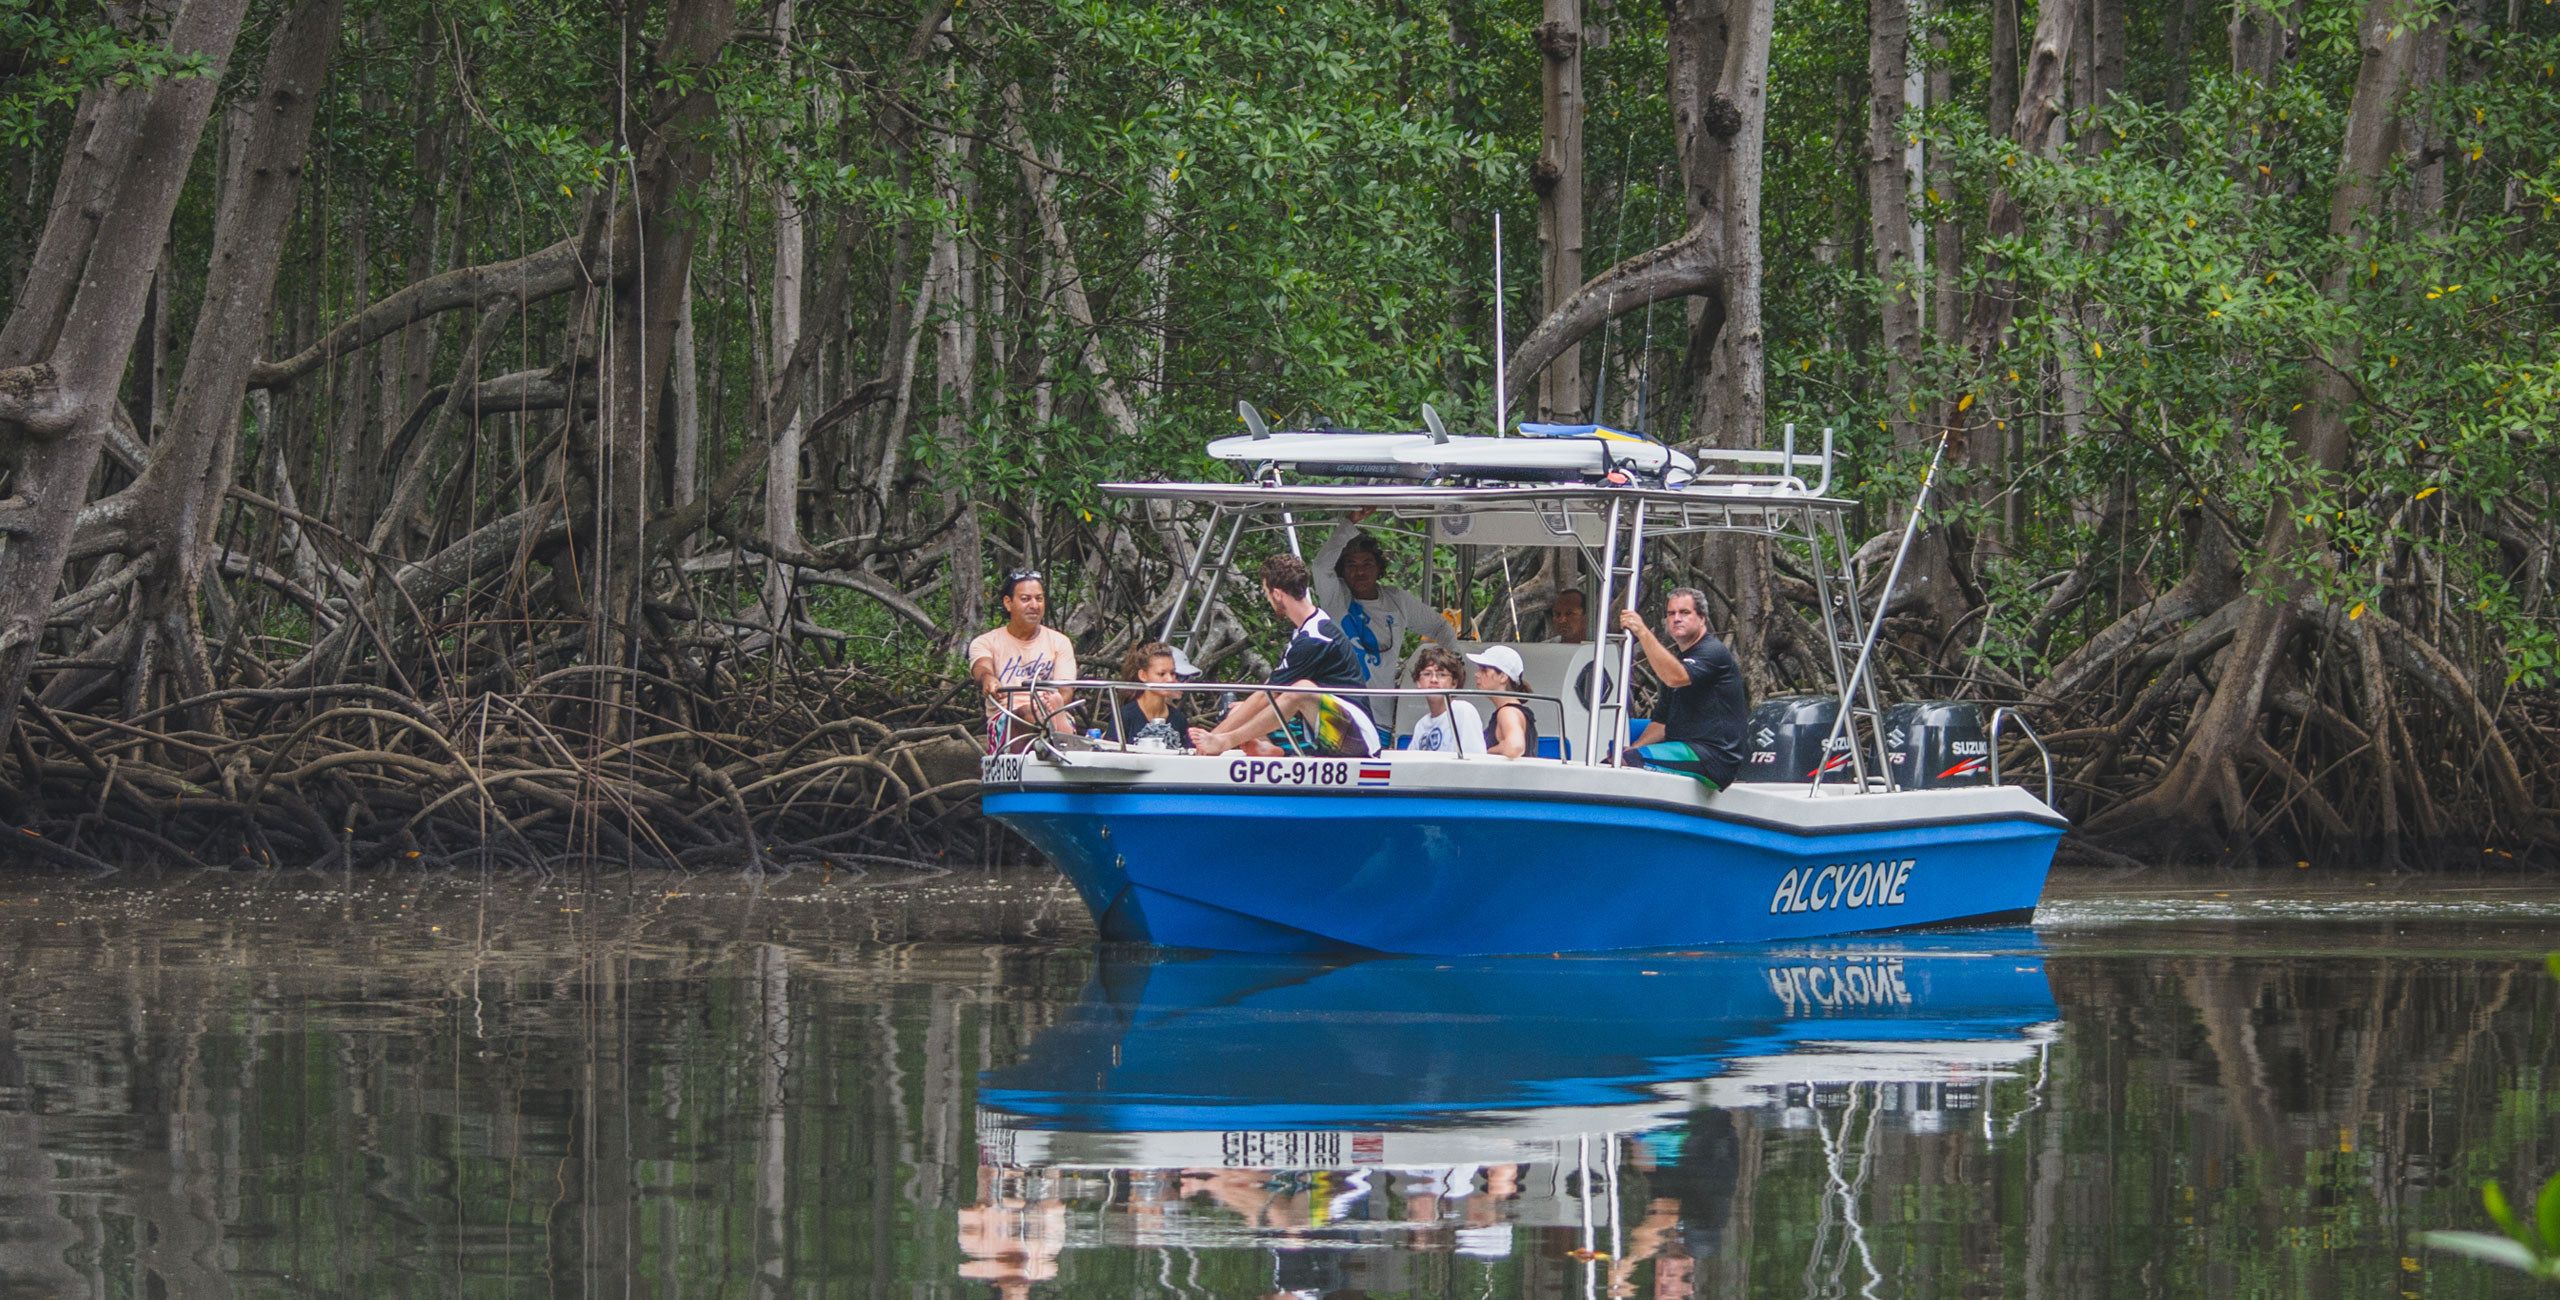 A group of kids enjoying a boat tour through a serene mangrove forest in Costa Rica, with intricate root systems visible along the water's edge.